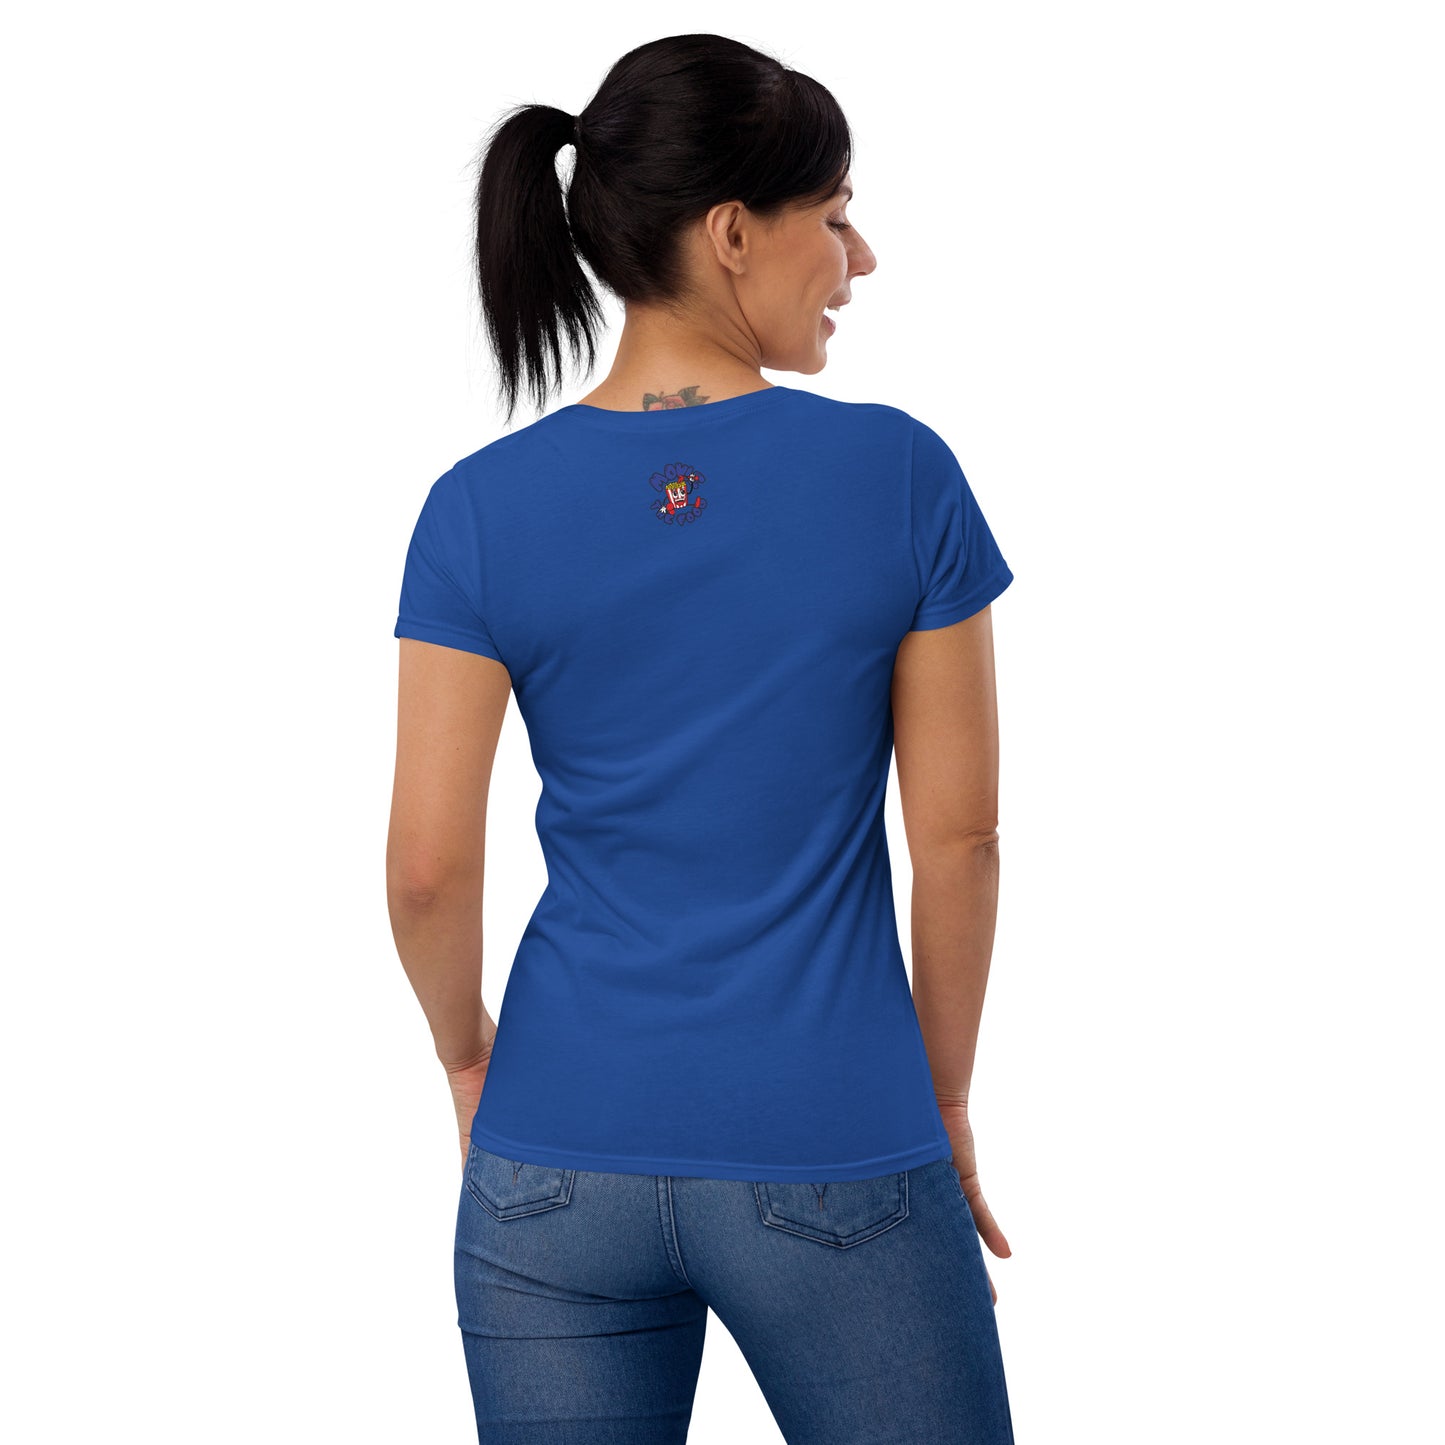 Movie The Food - Pho-lice Academy Women's T-Shirt - Royal Blue - Model Back